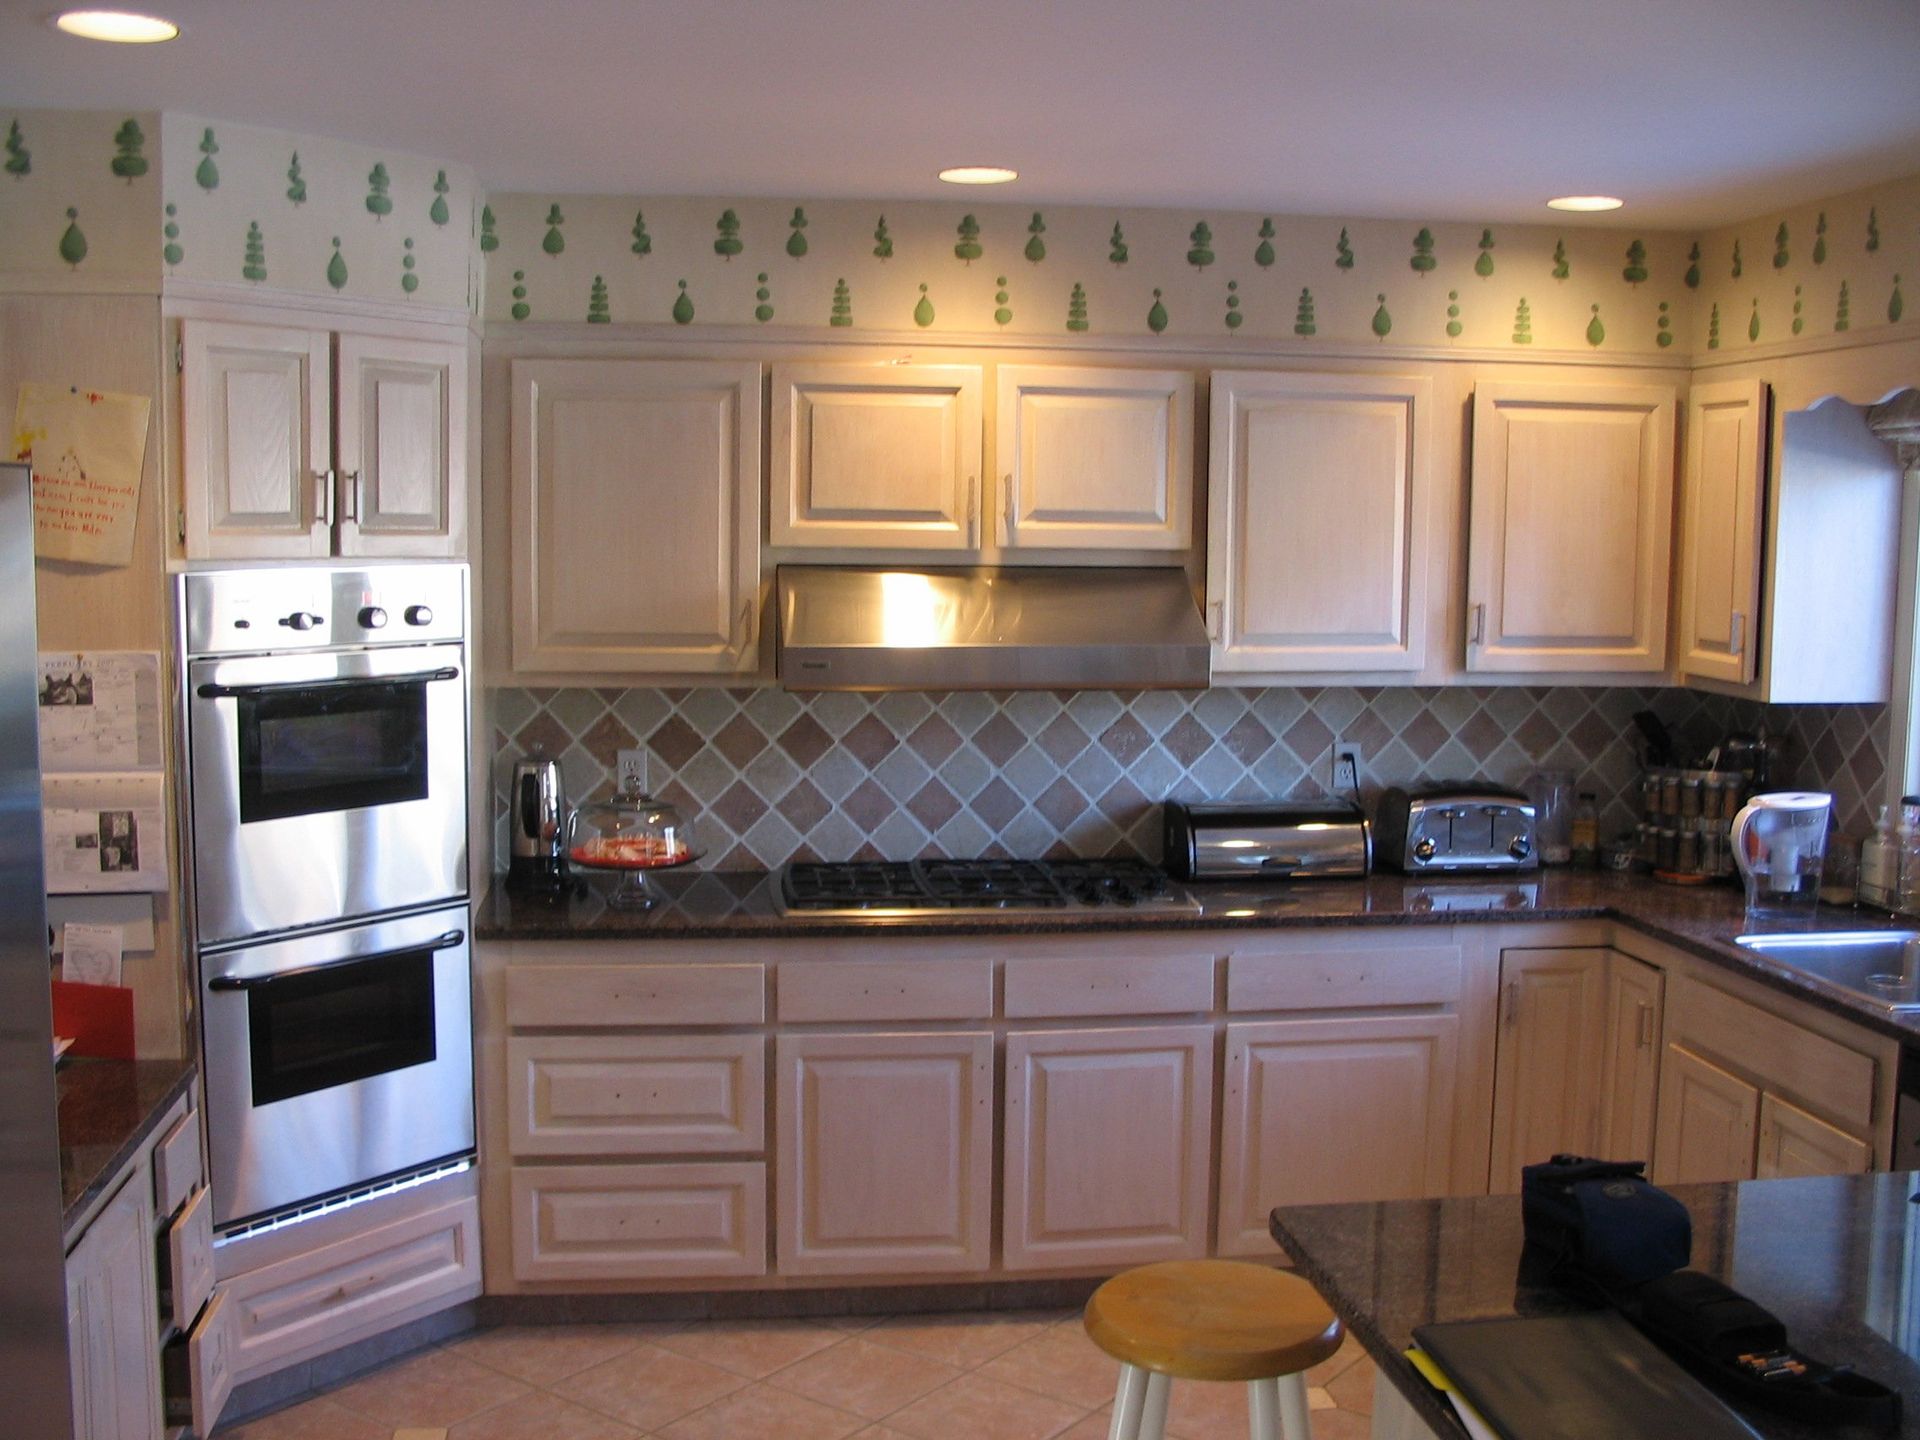 Kitchen with outdated wallpaper